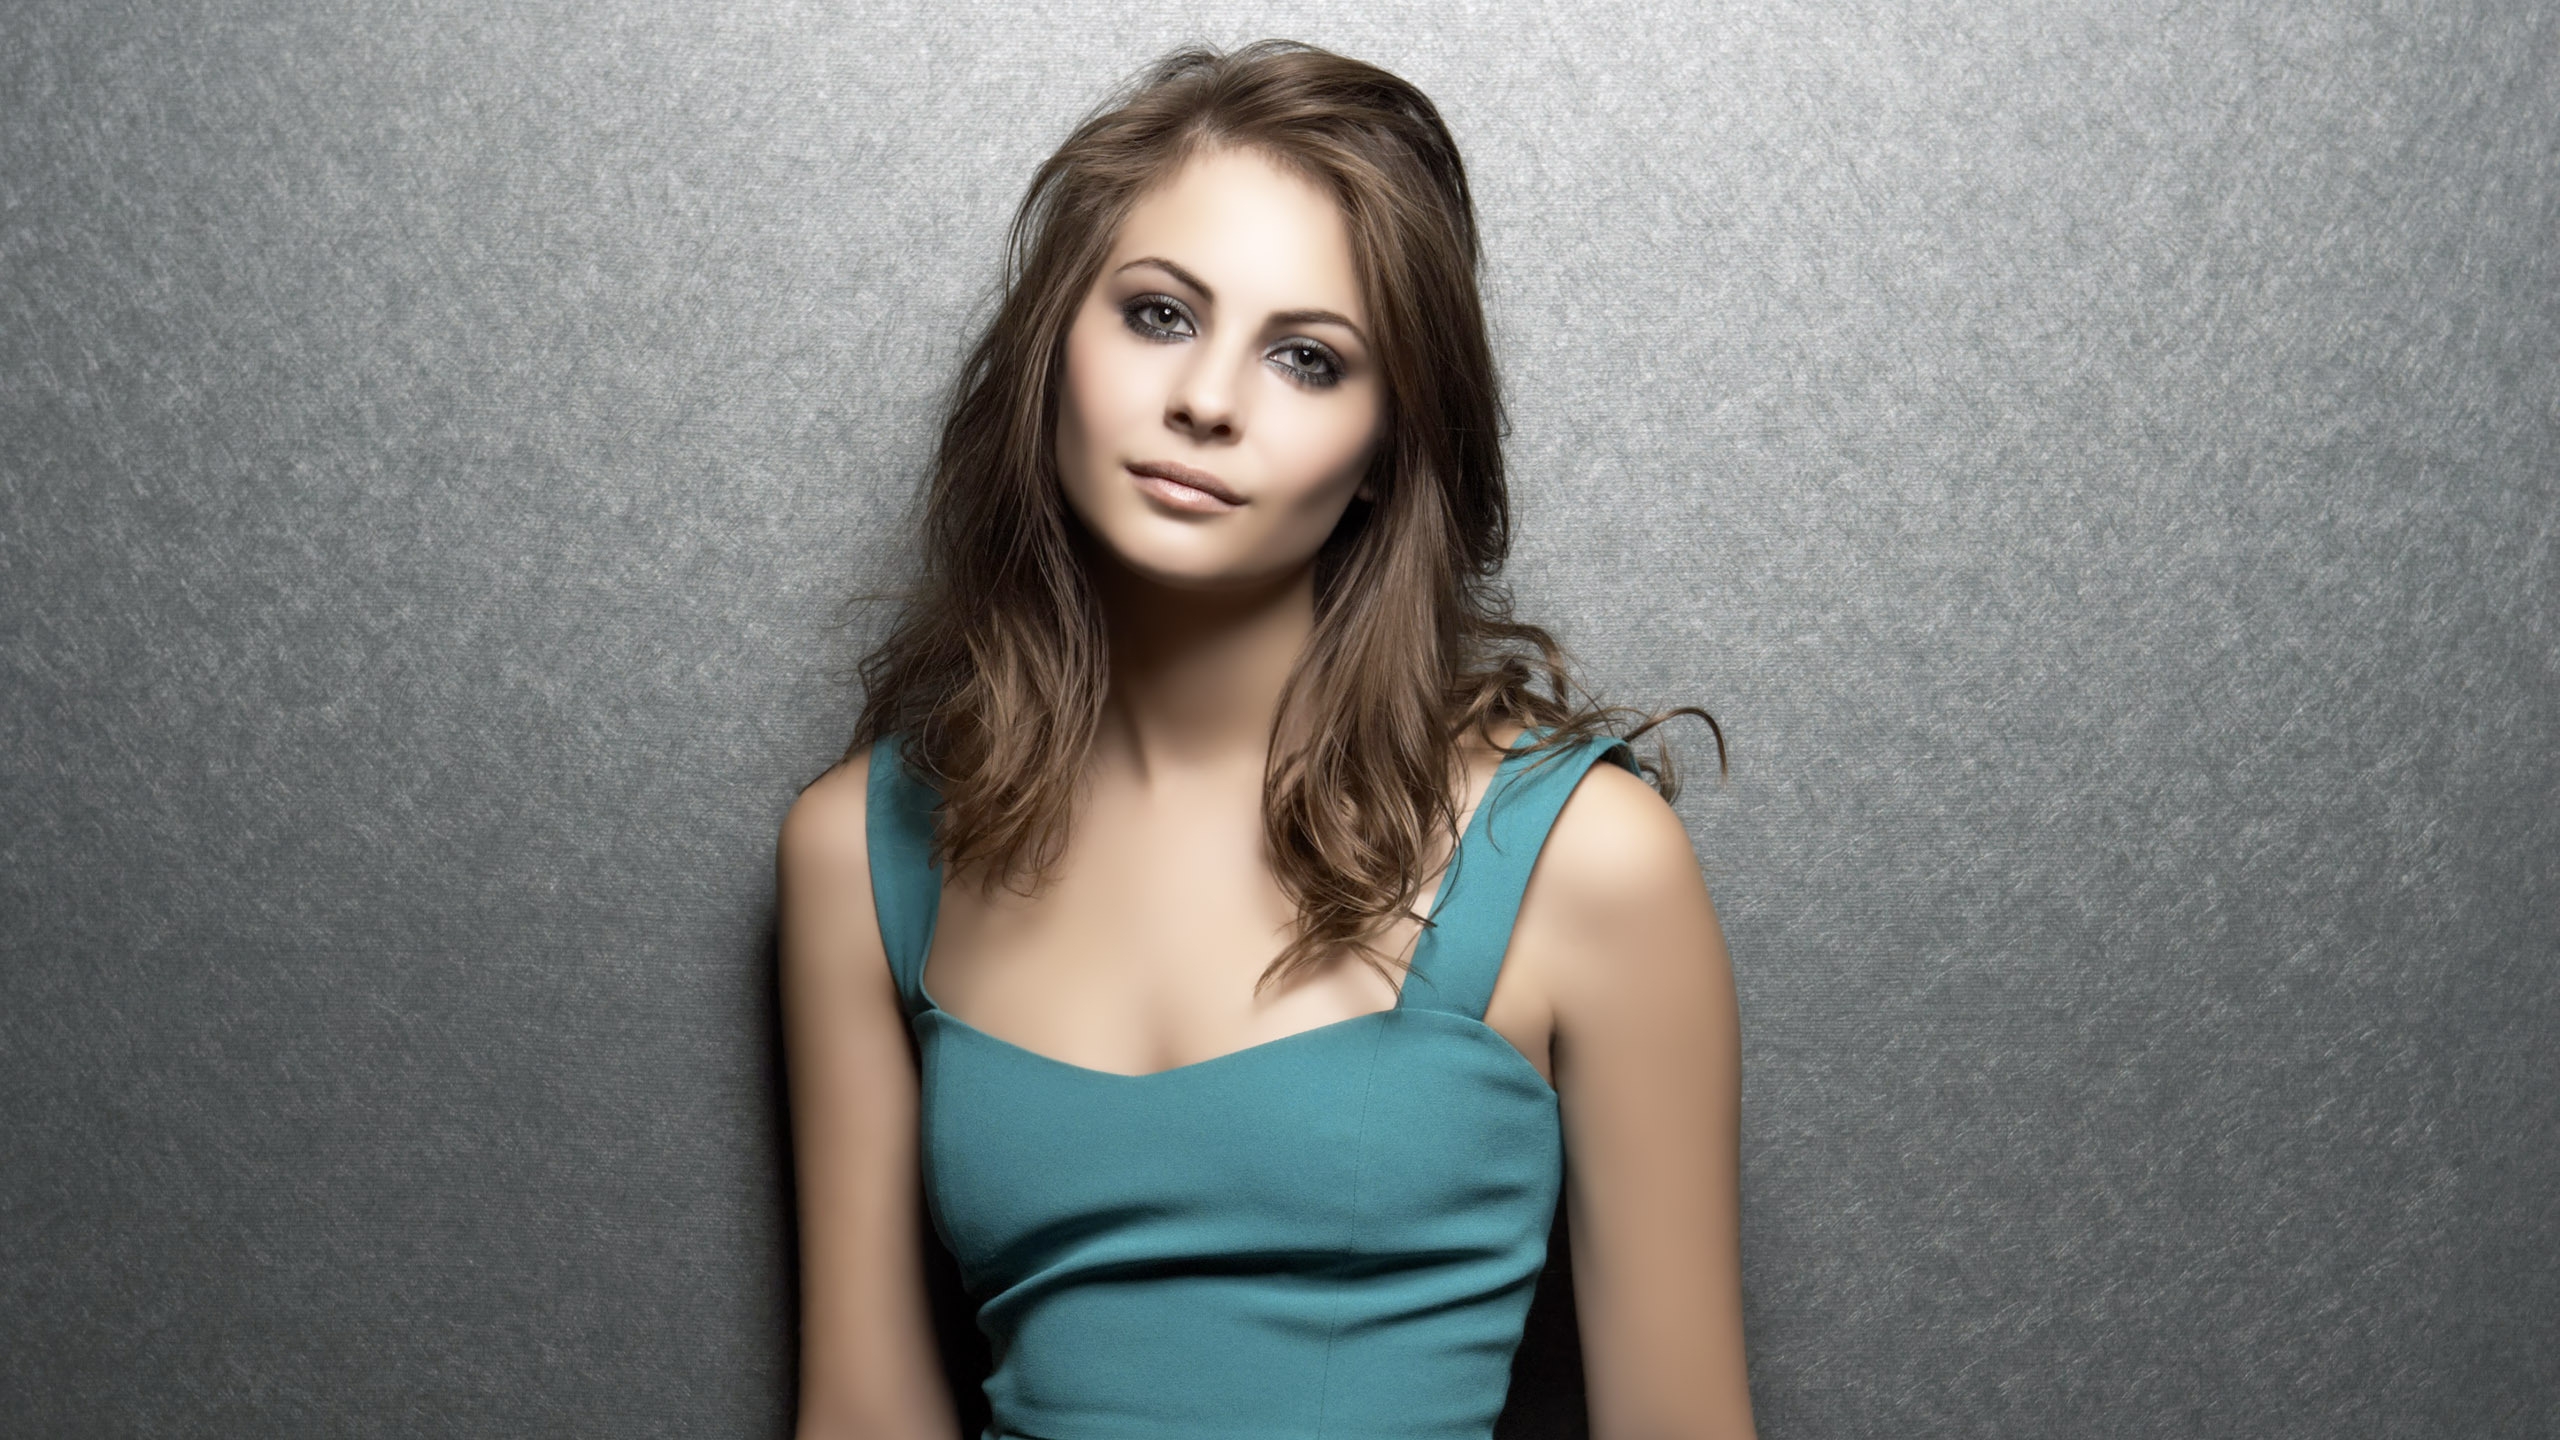 Sexy Willa Holland for 2560x1440 HDTV resolution